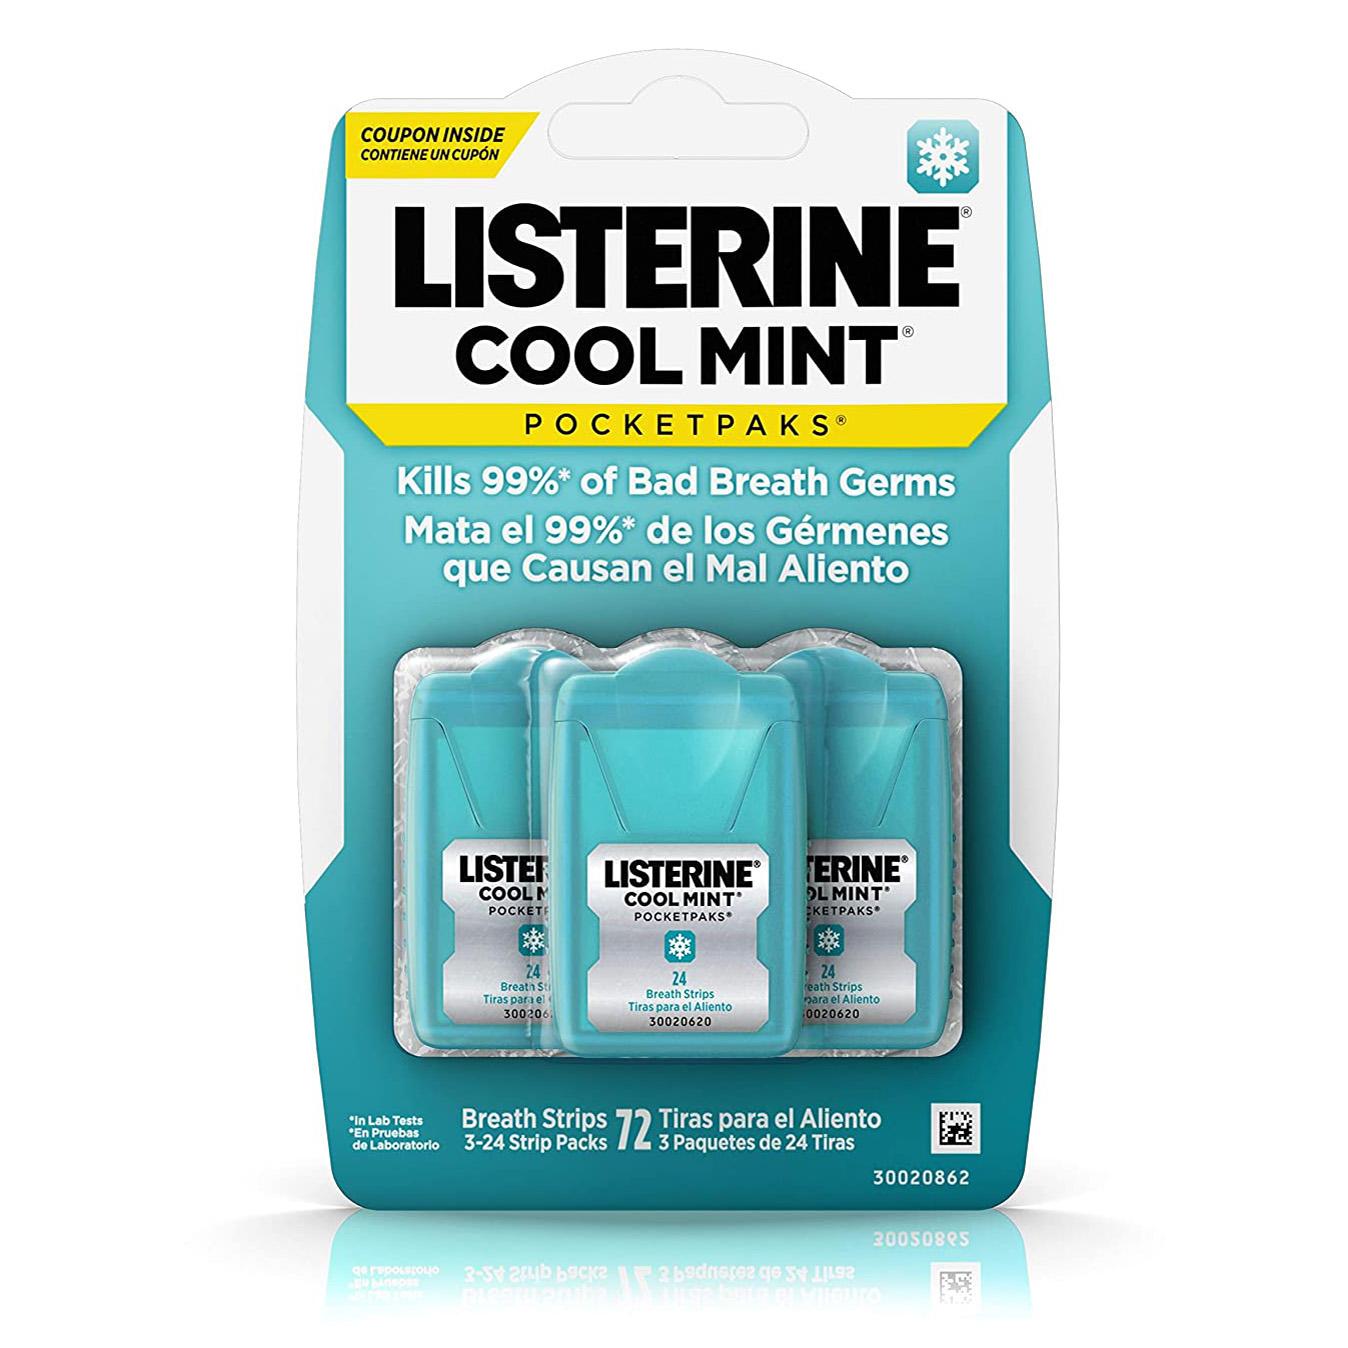 Listerine Pocketpaks Cool Mint Breath Strips for $2.52 Shipped